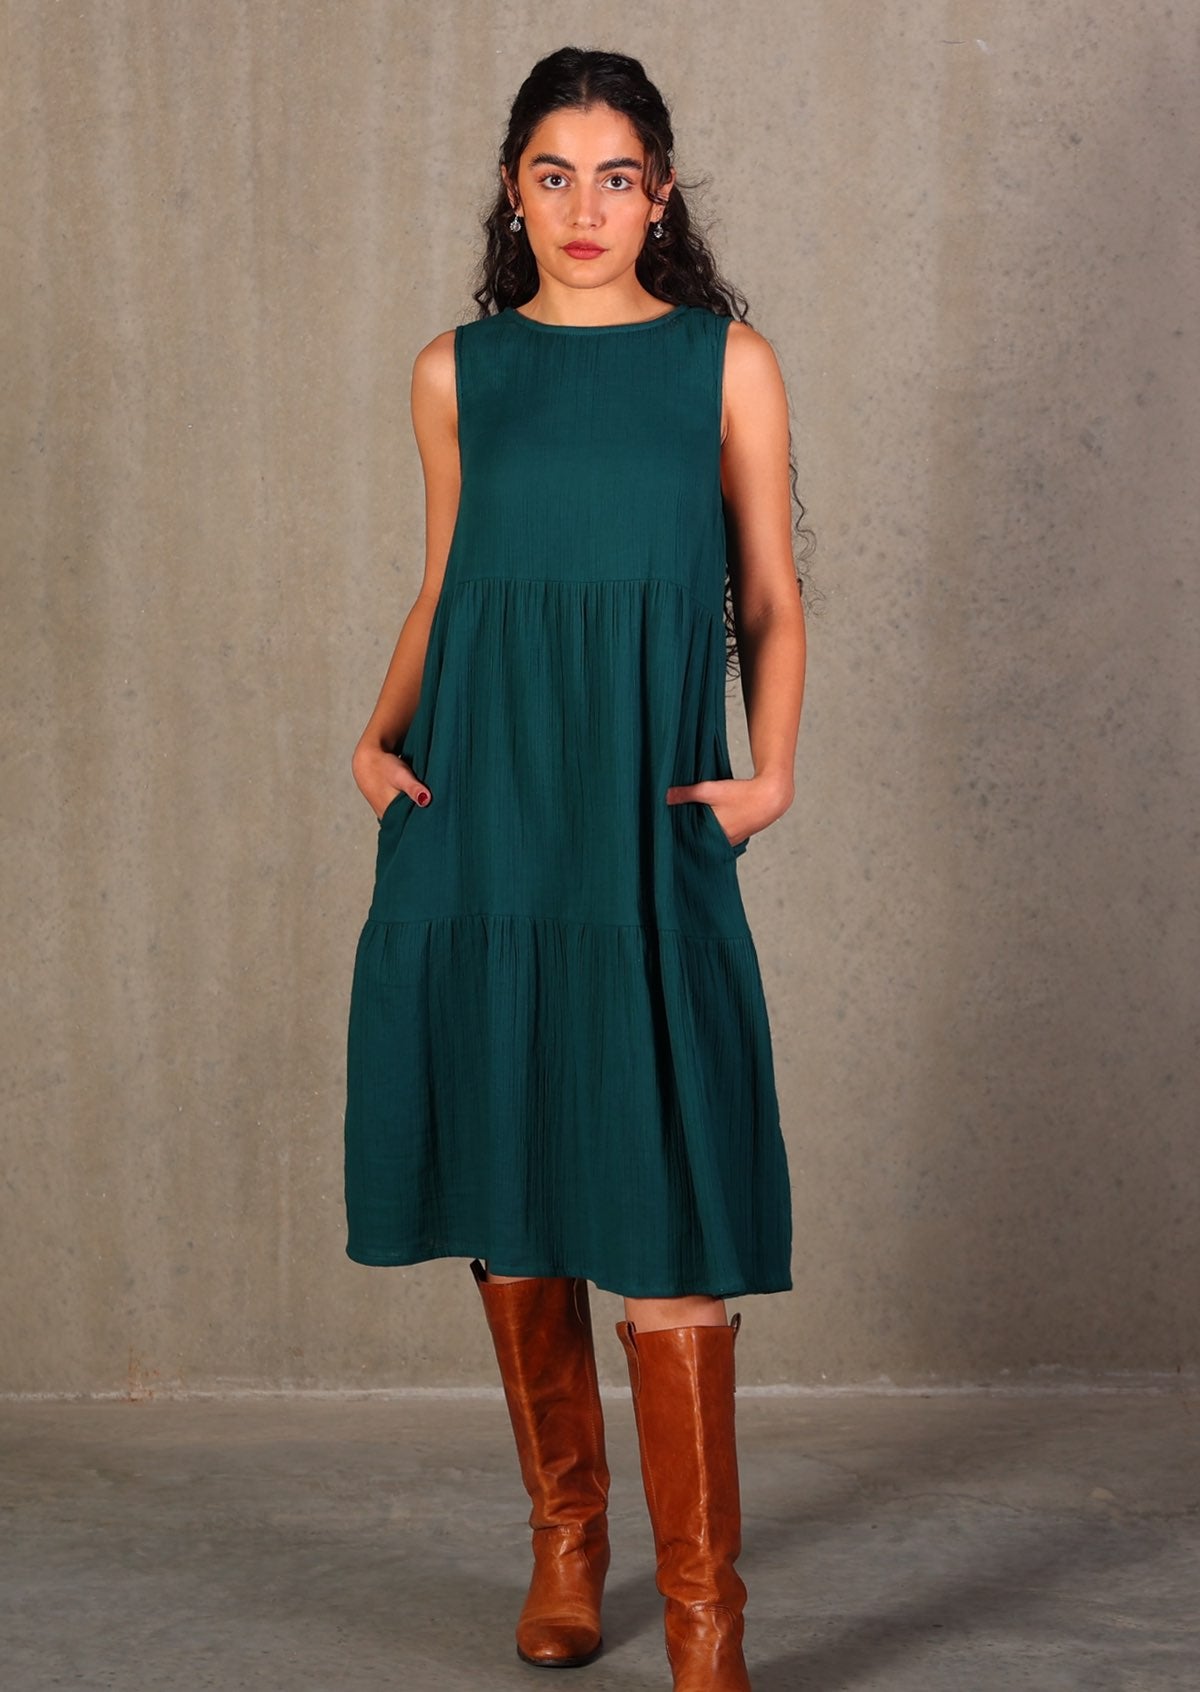 Double cotton sleeveless dress is great for warm days and can be layered in the cool